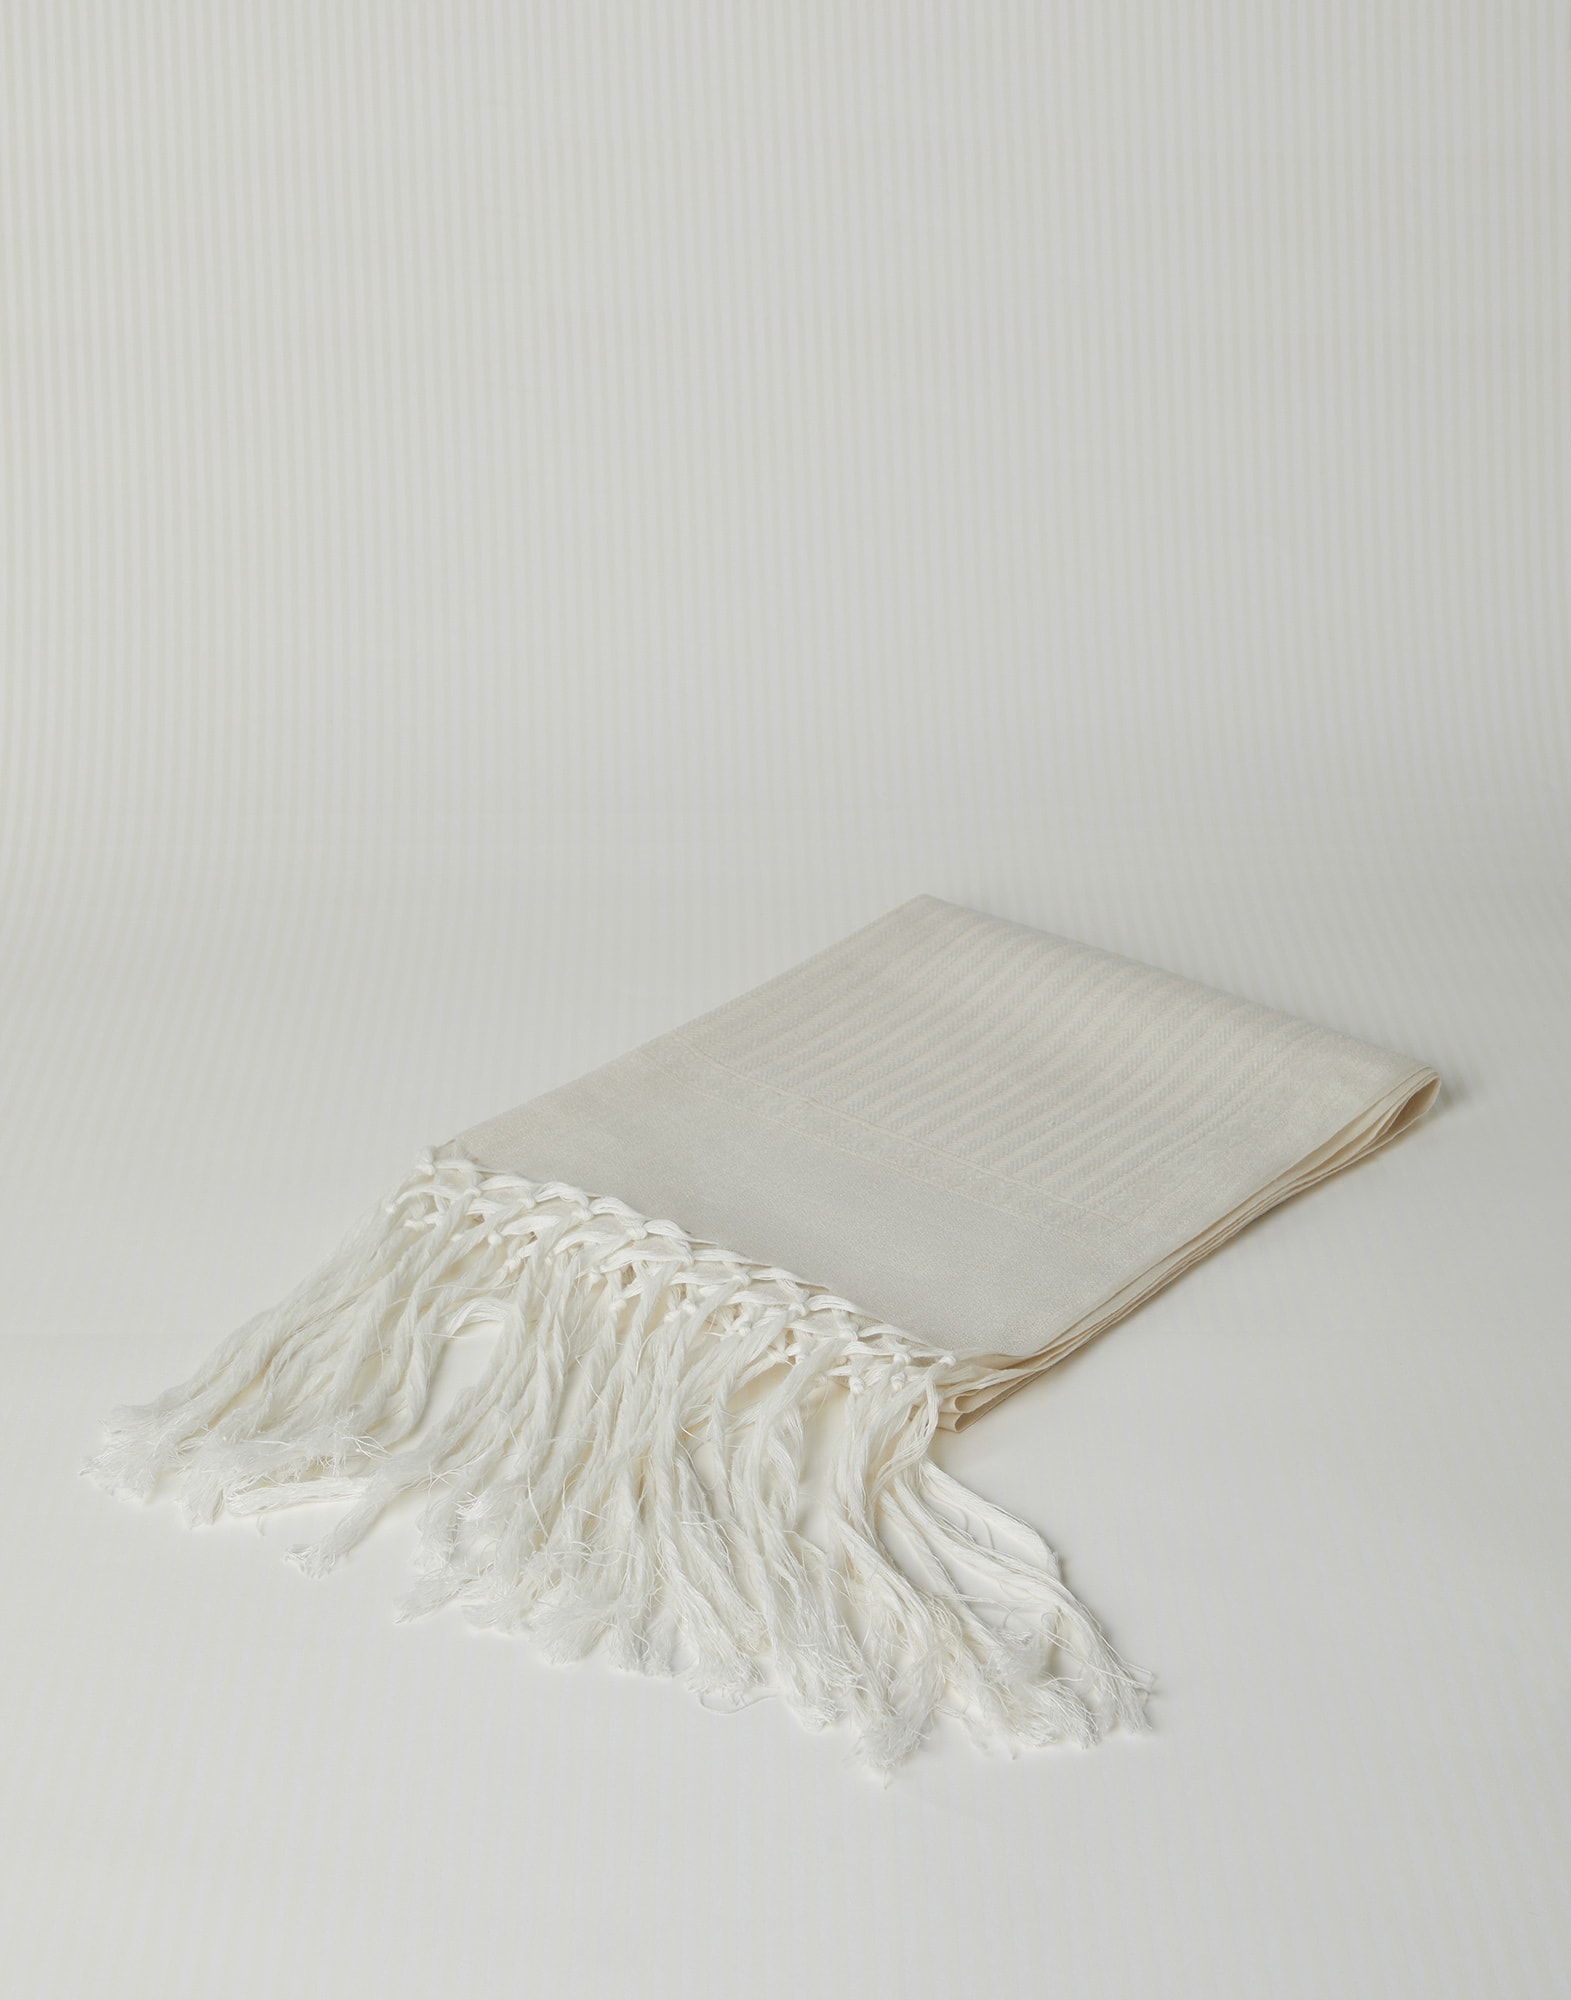 Linen and cashmere "Winter in White" towel